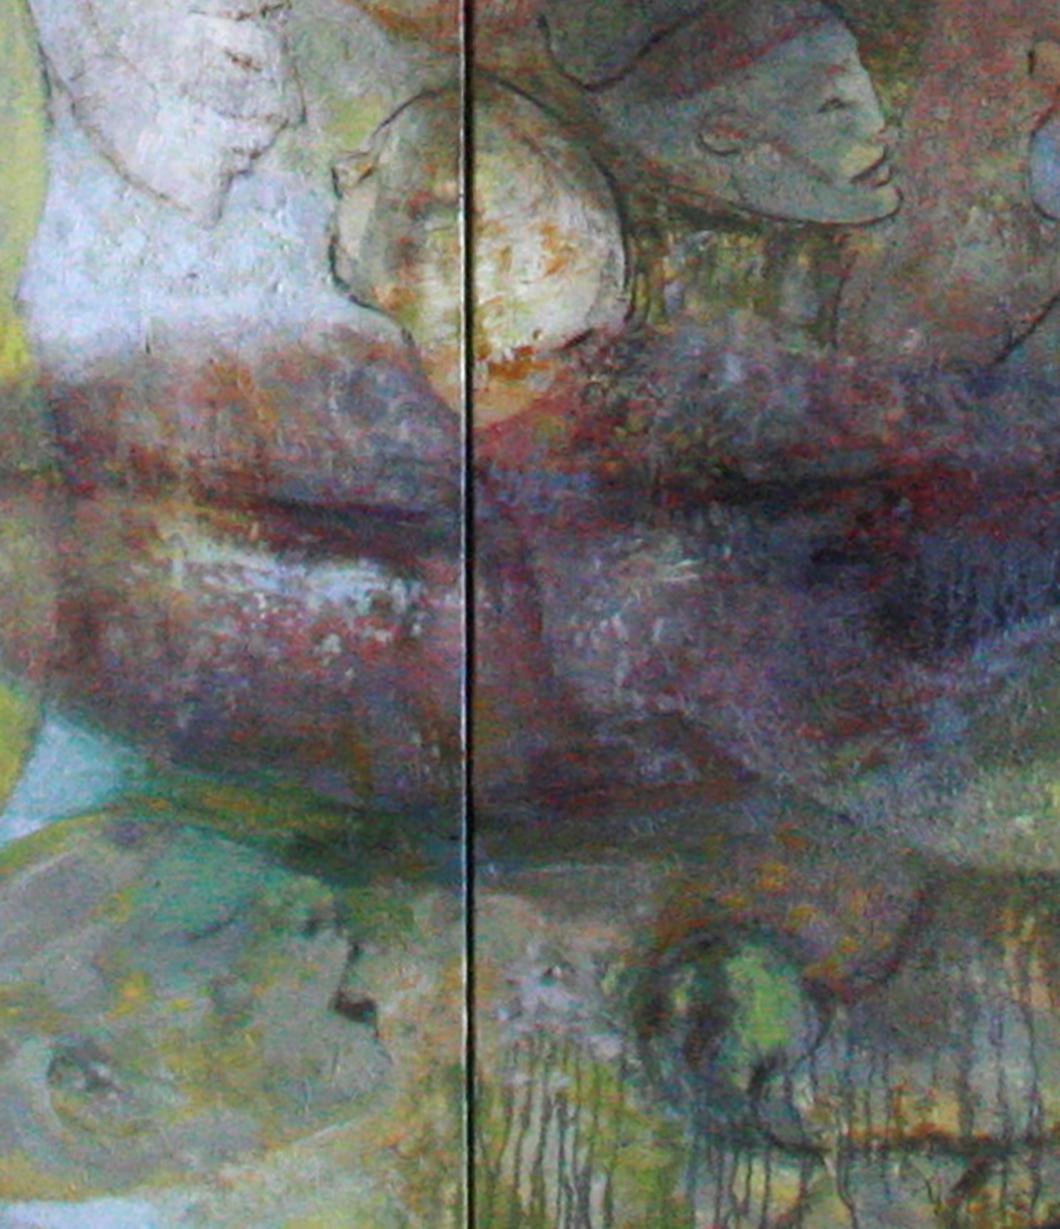 20-9-12 Diptych - 21st Century, Contemporary, Portrait Painting, Oil on Canvas 4